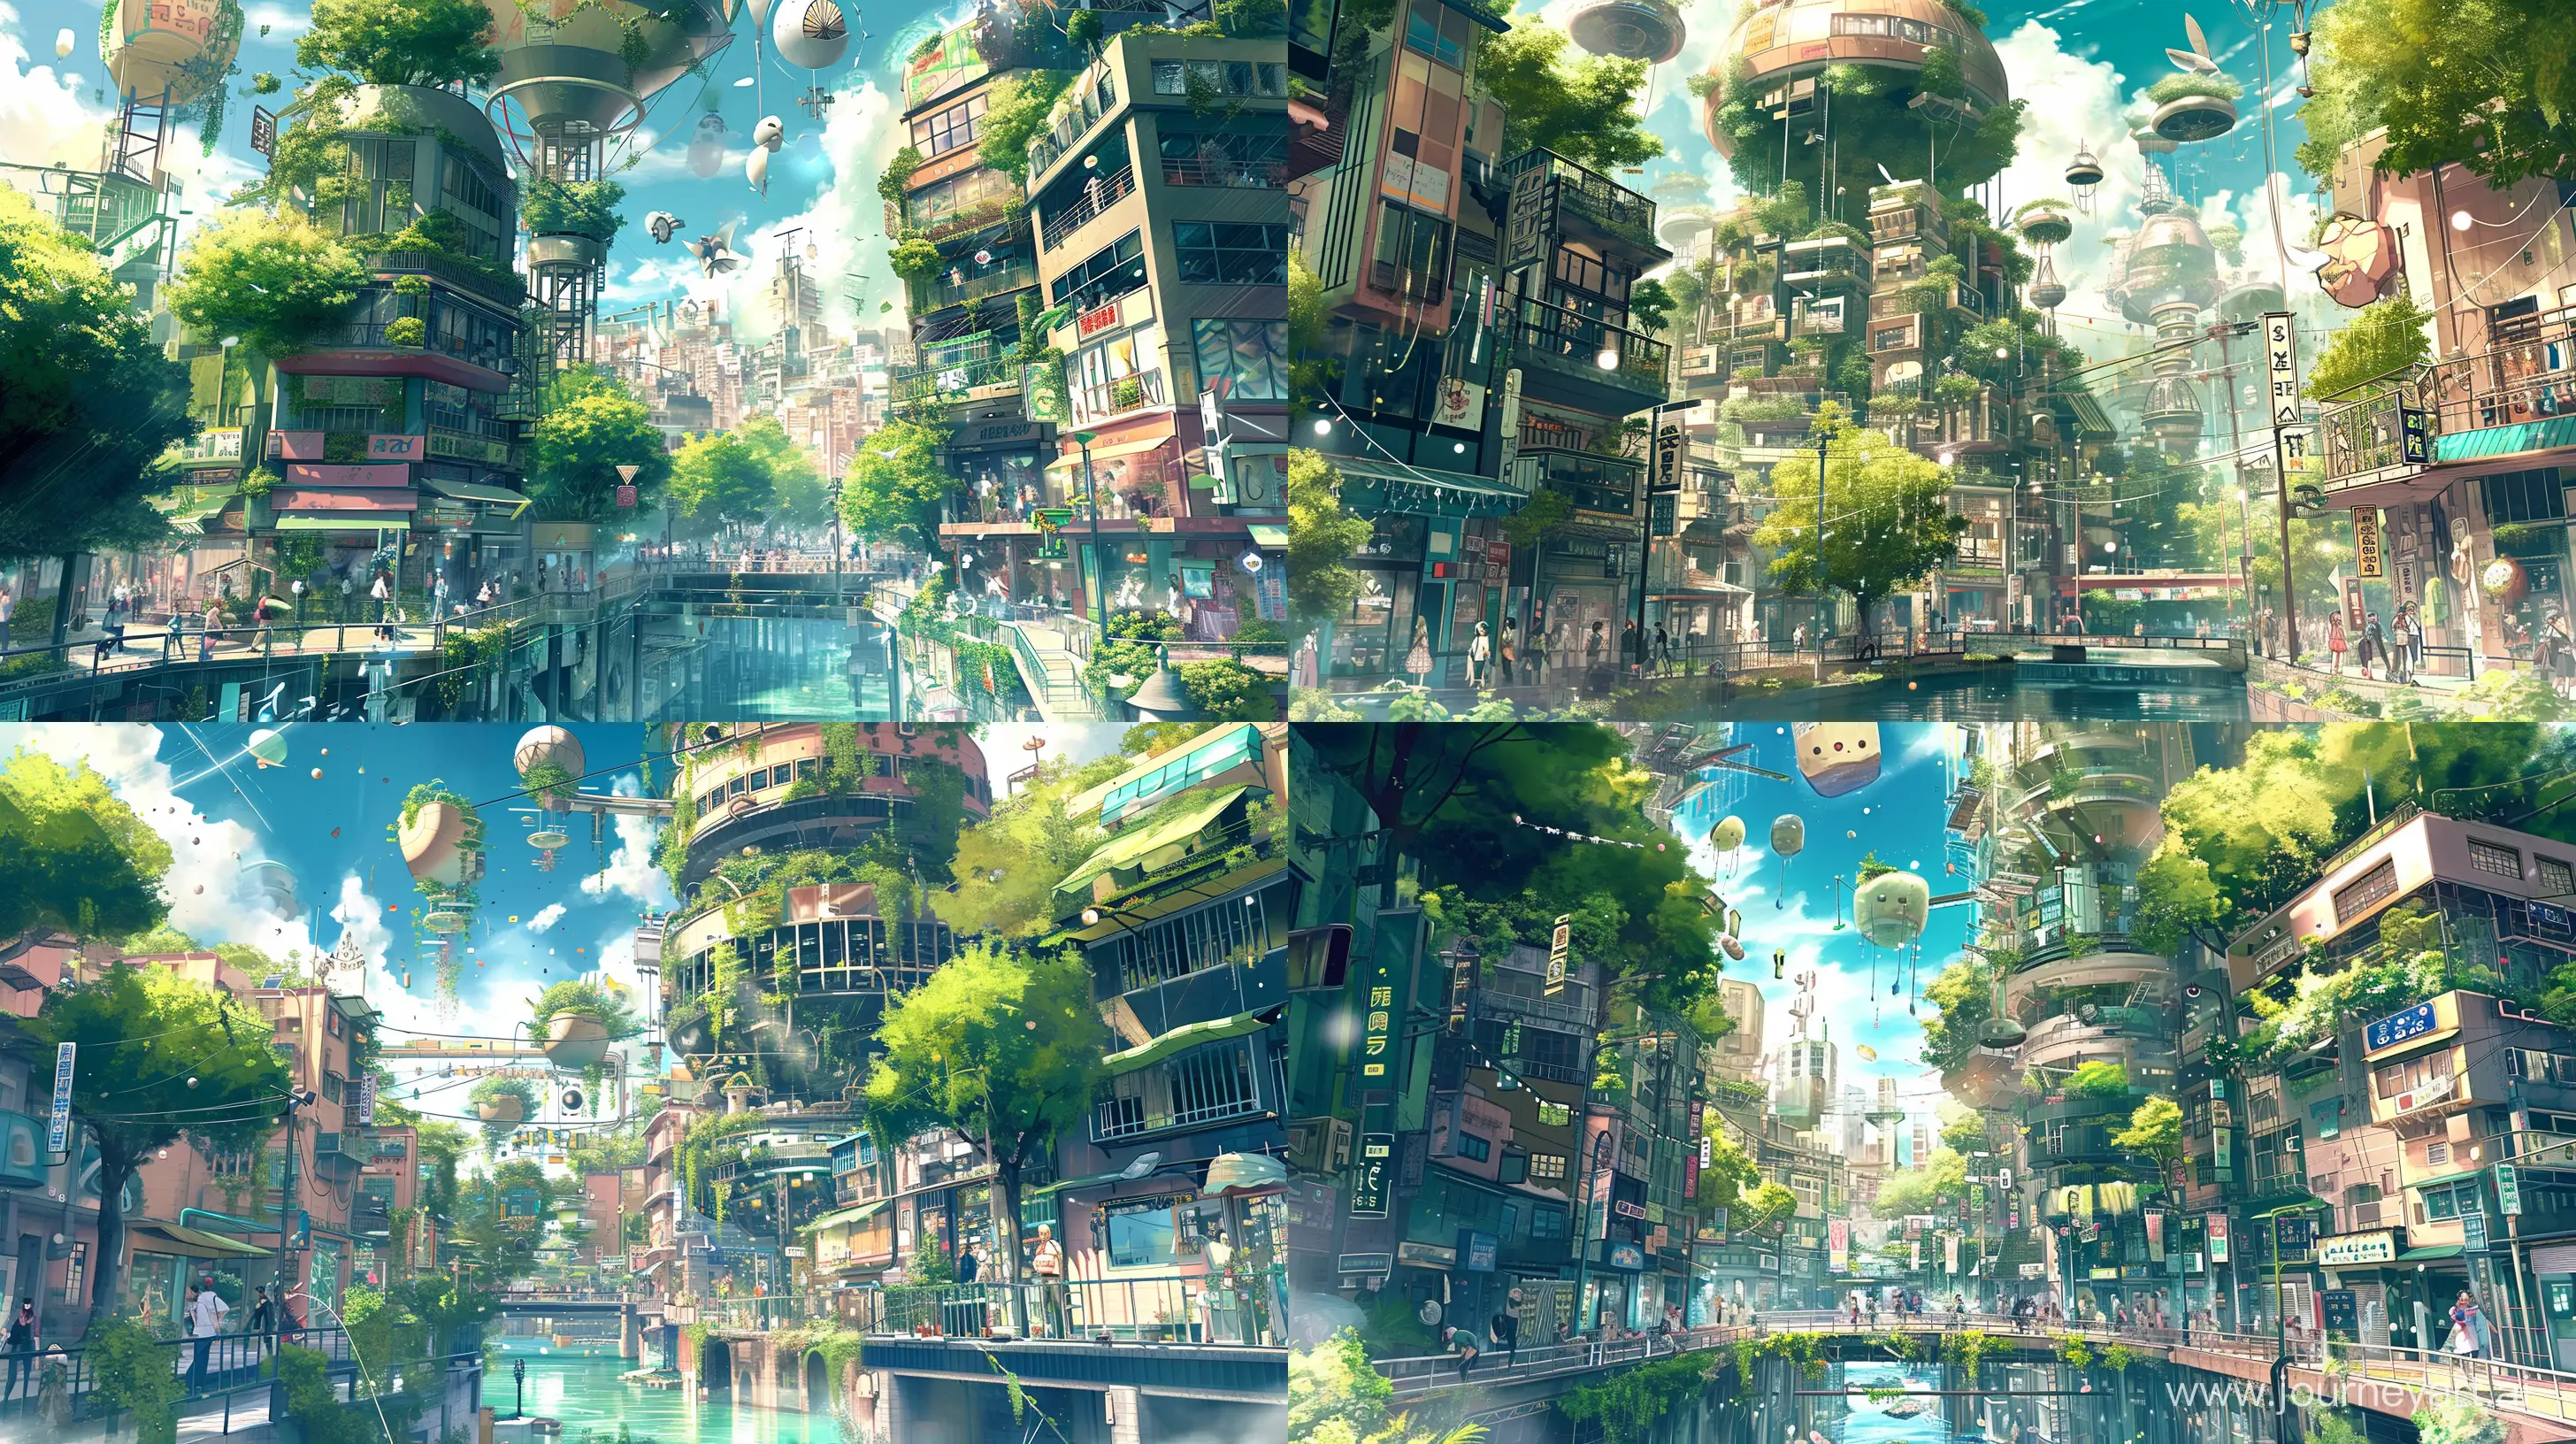 Anime-Cityscape-with-Floating-Objects-and-Lush-Greenery